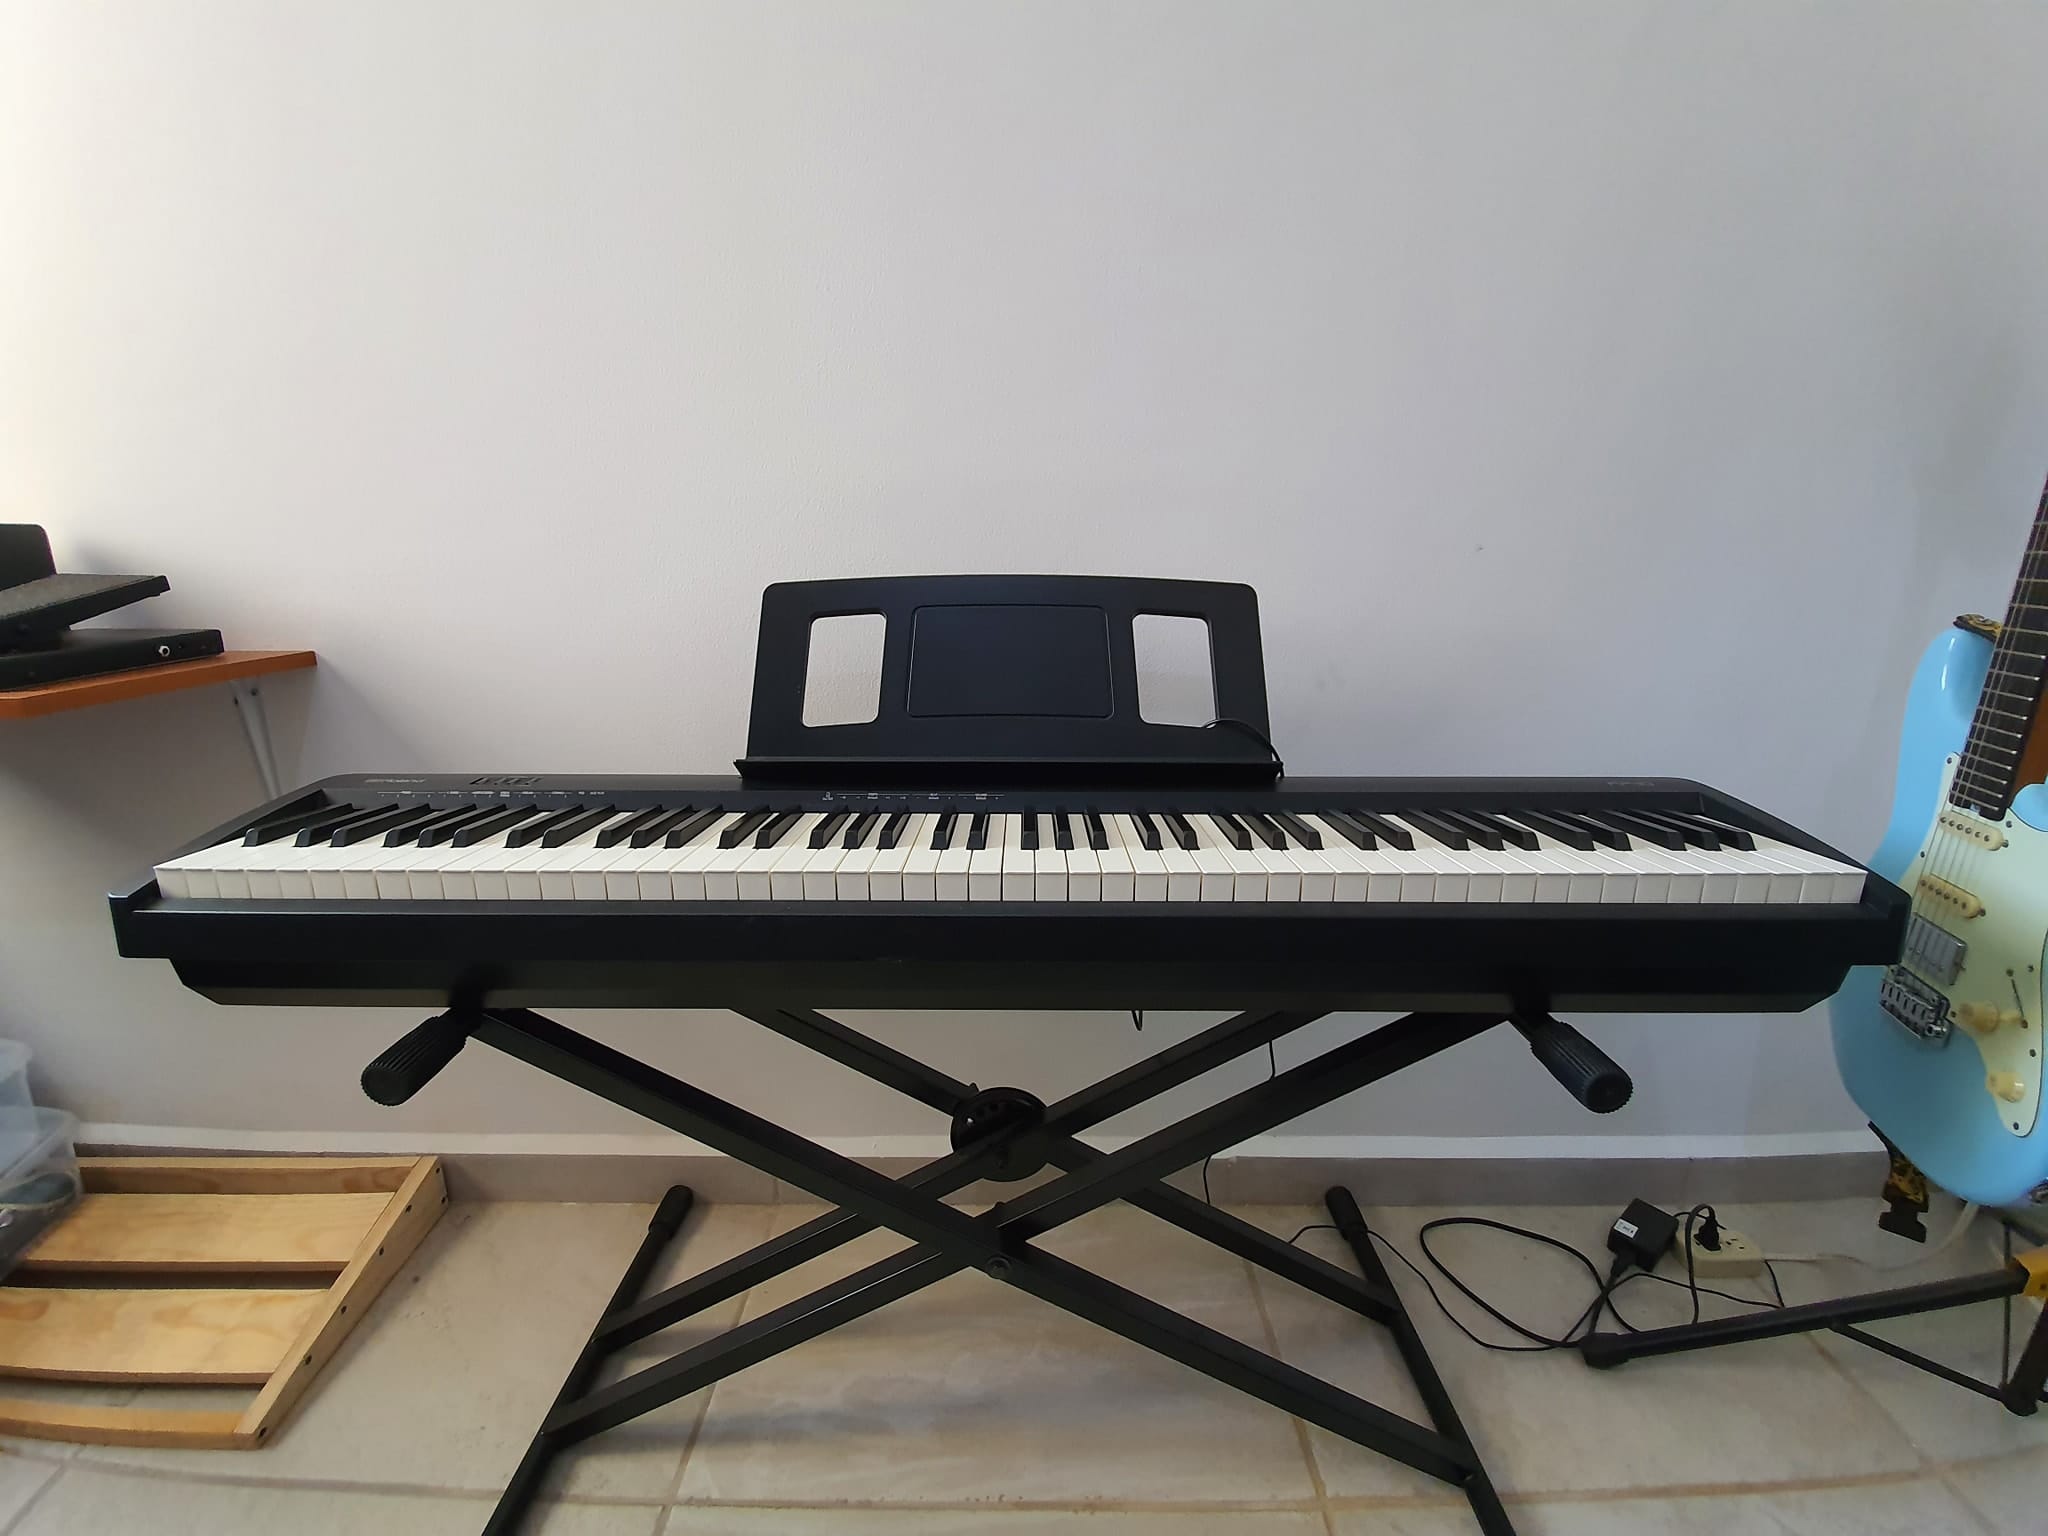 The Roland FP-10 provided a more realistic experience